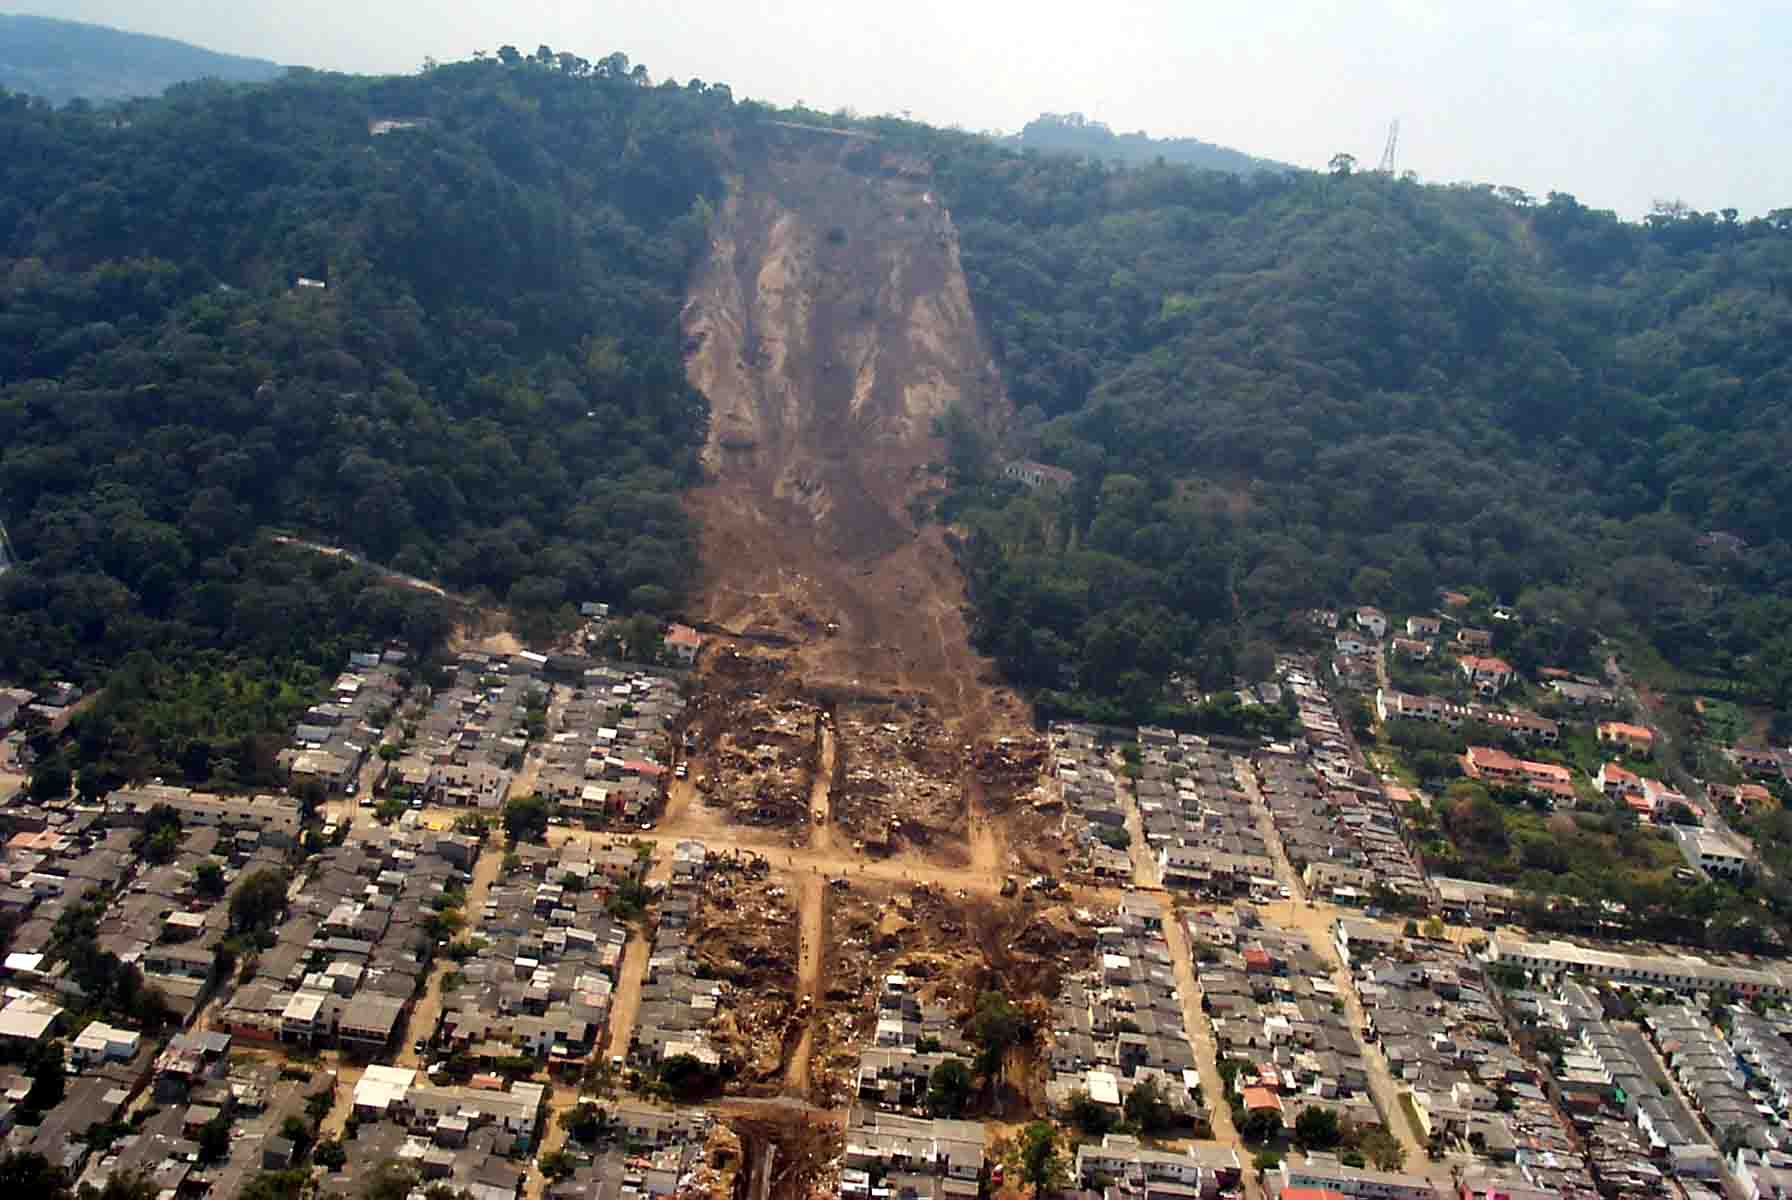 Aerial view of landslide that buried Colonia Las Colinas.